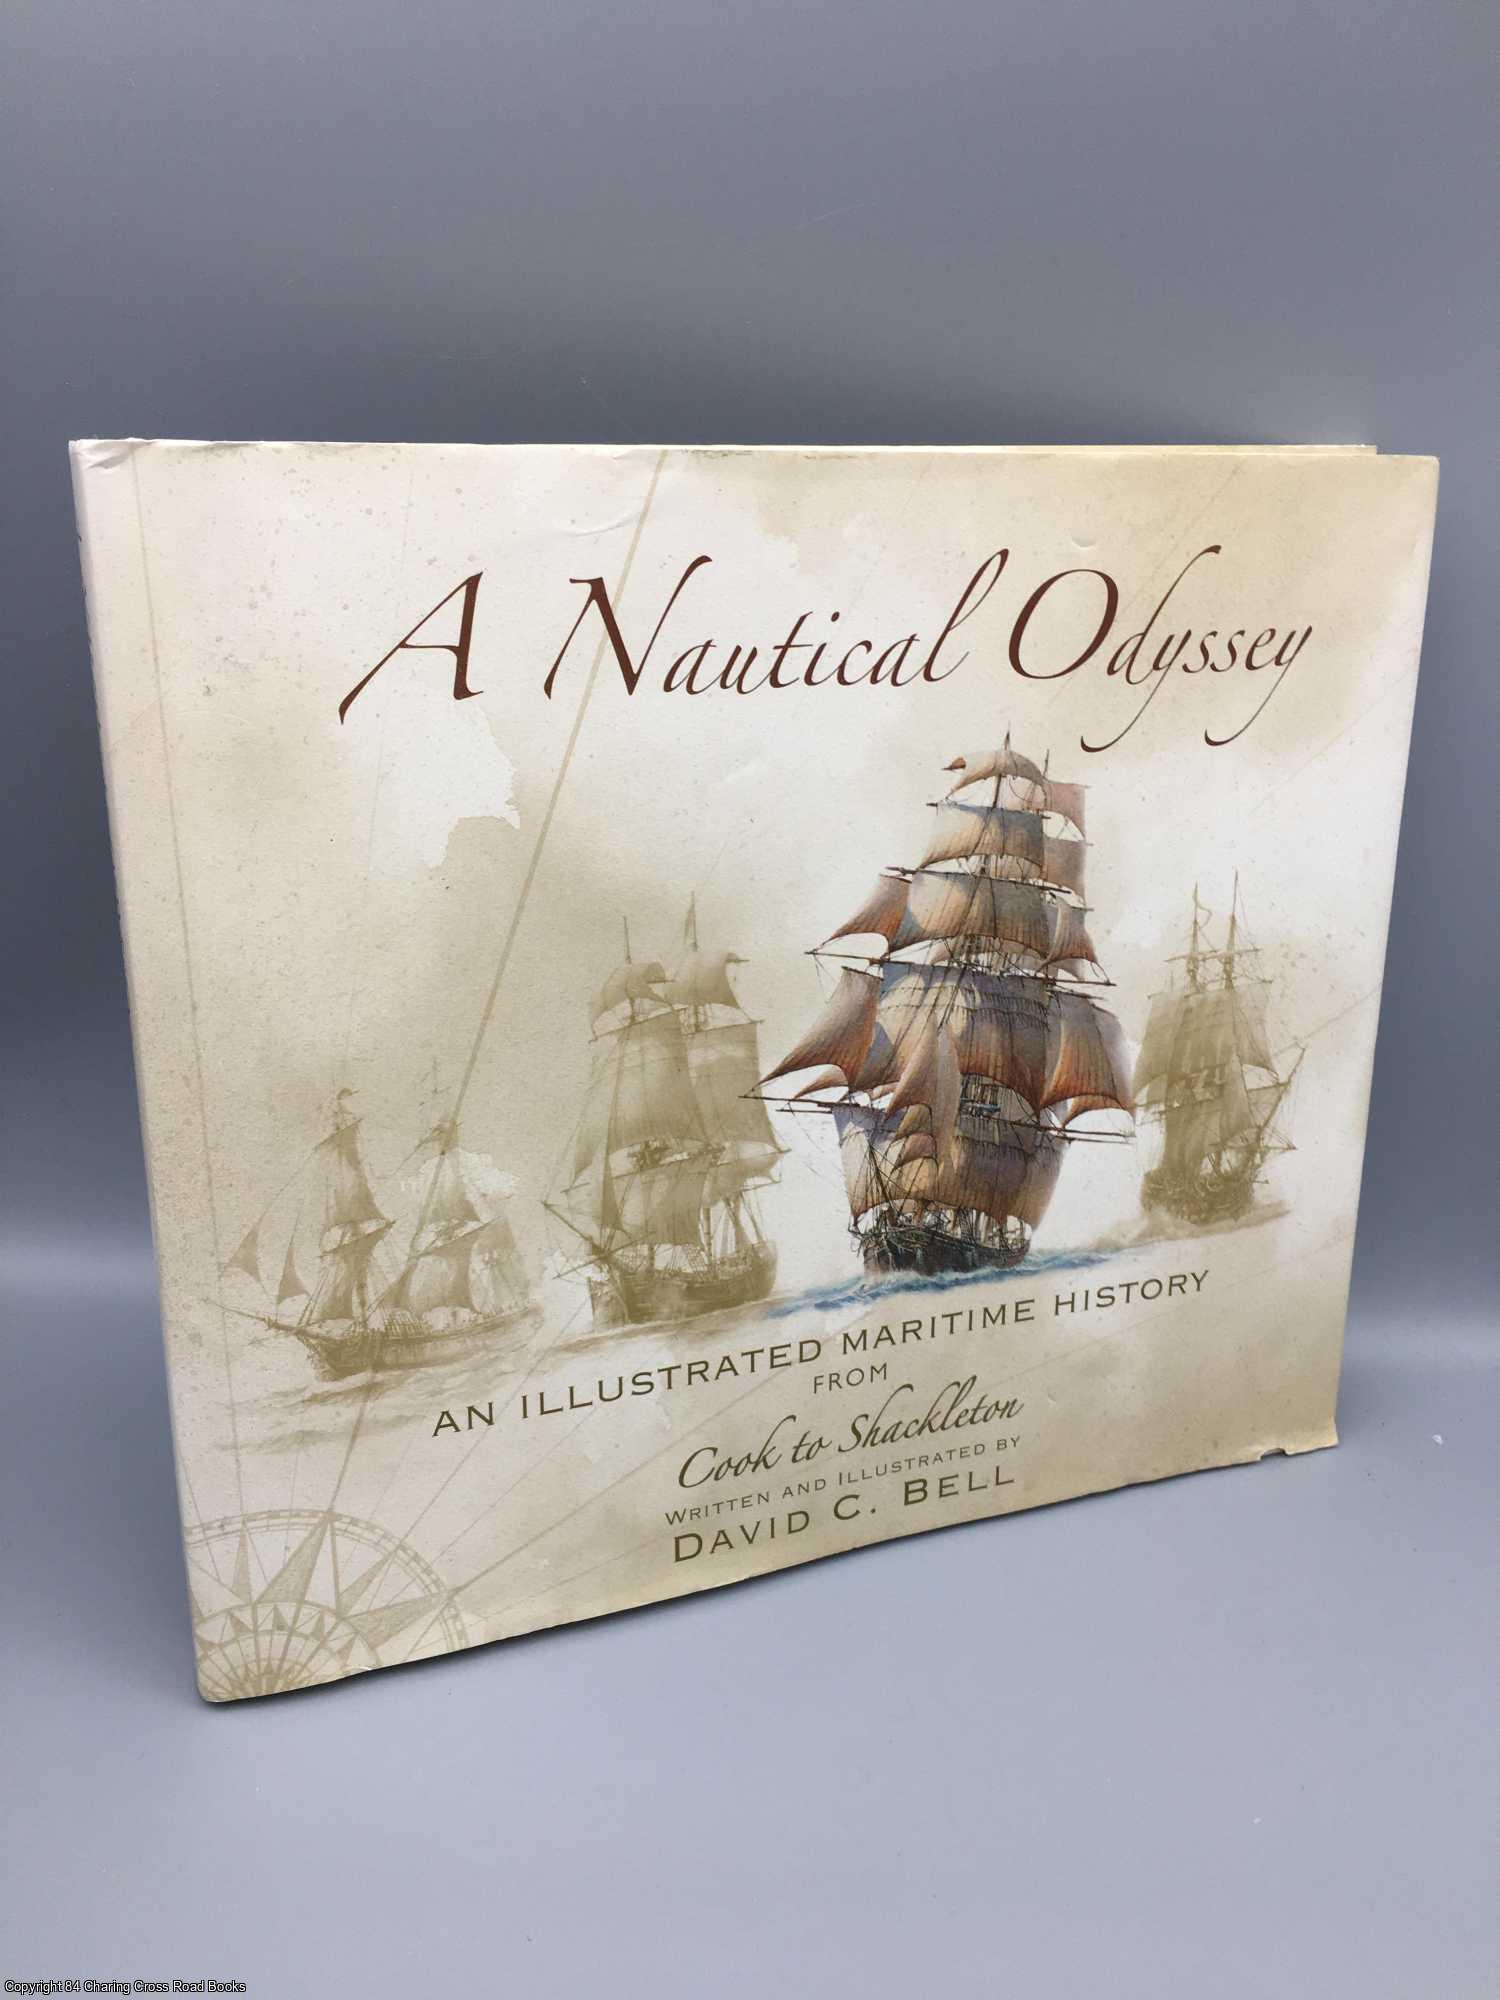 Bell, David C. - A Nautical Odyssey: illustrated maritime history from Cook to Shackleton